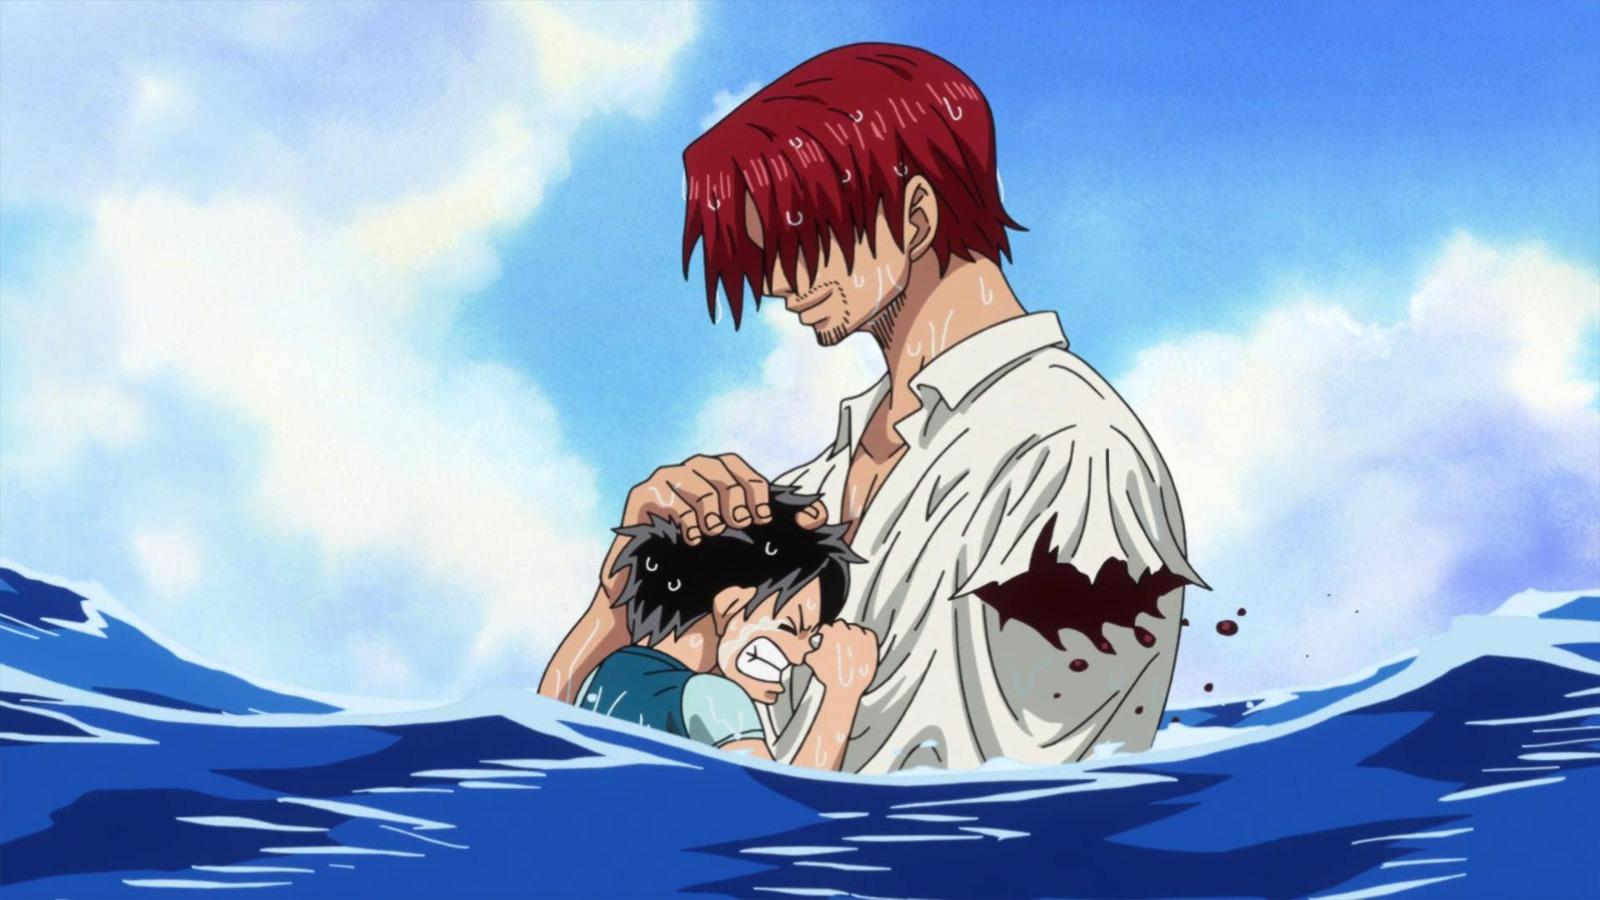 An image of Shanks sacrificing his arm for Luffy